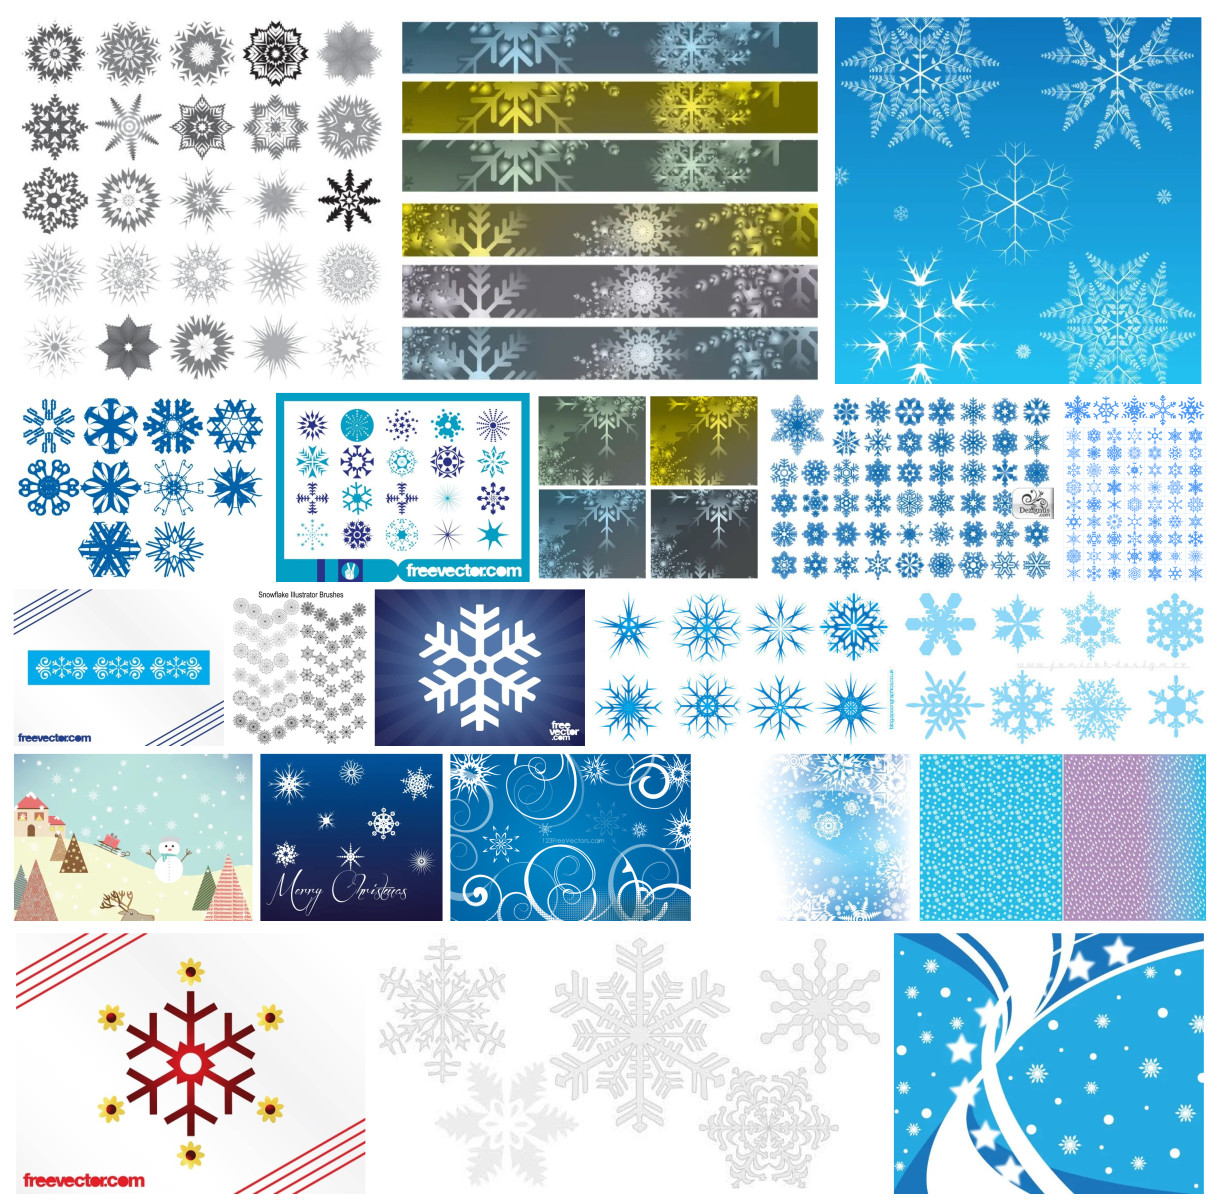 The Artistic Array of Snowflakes Vector Designs